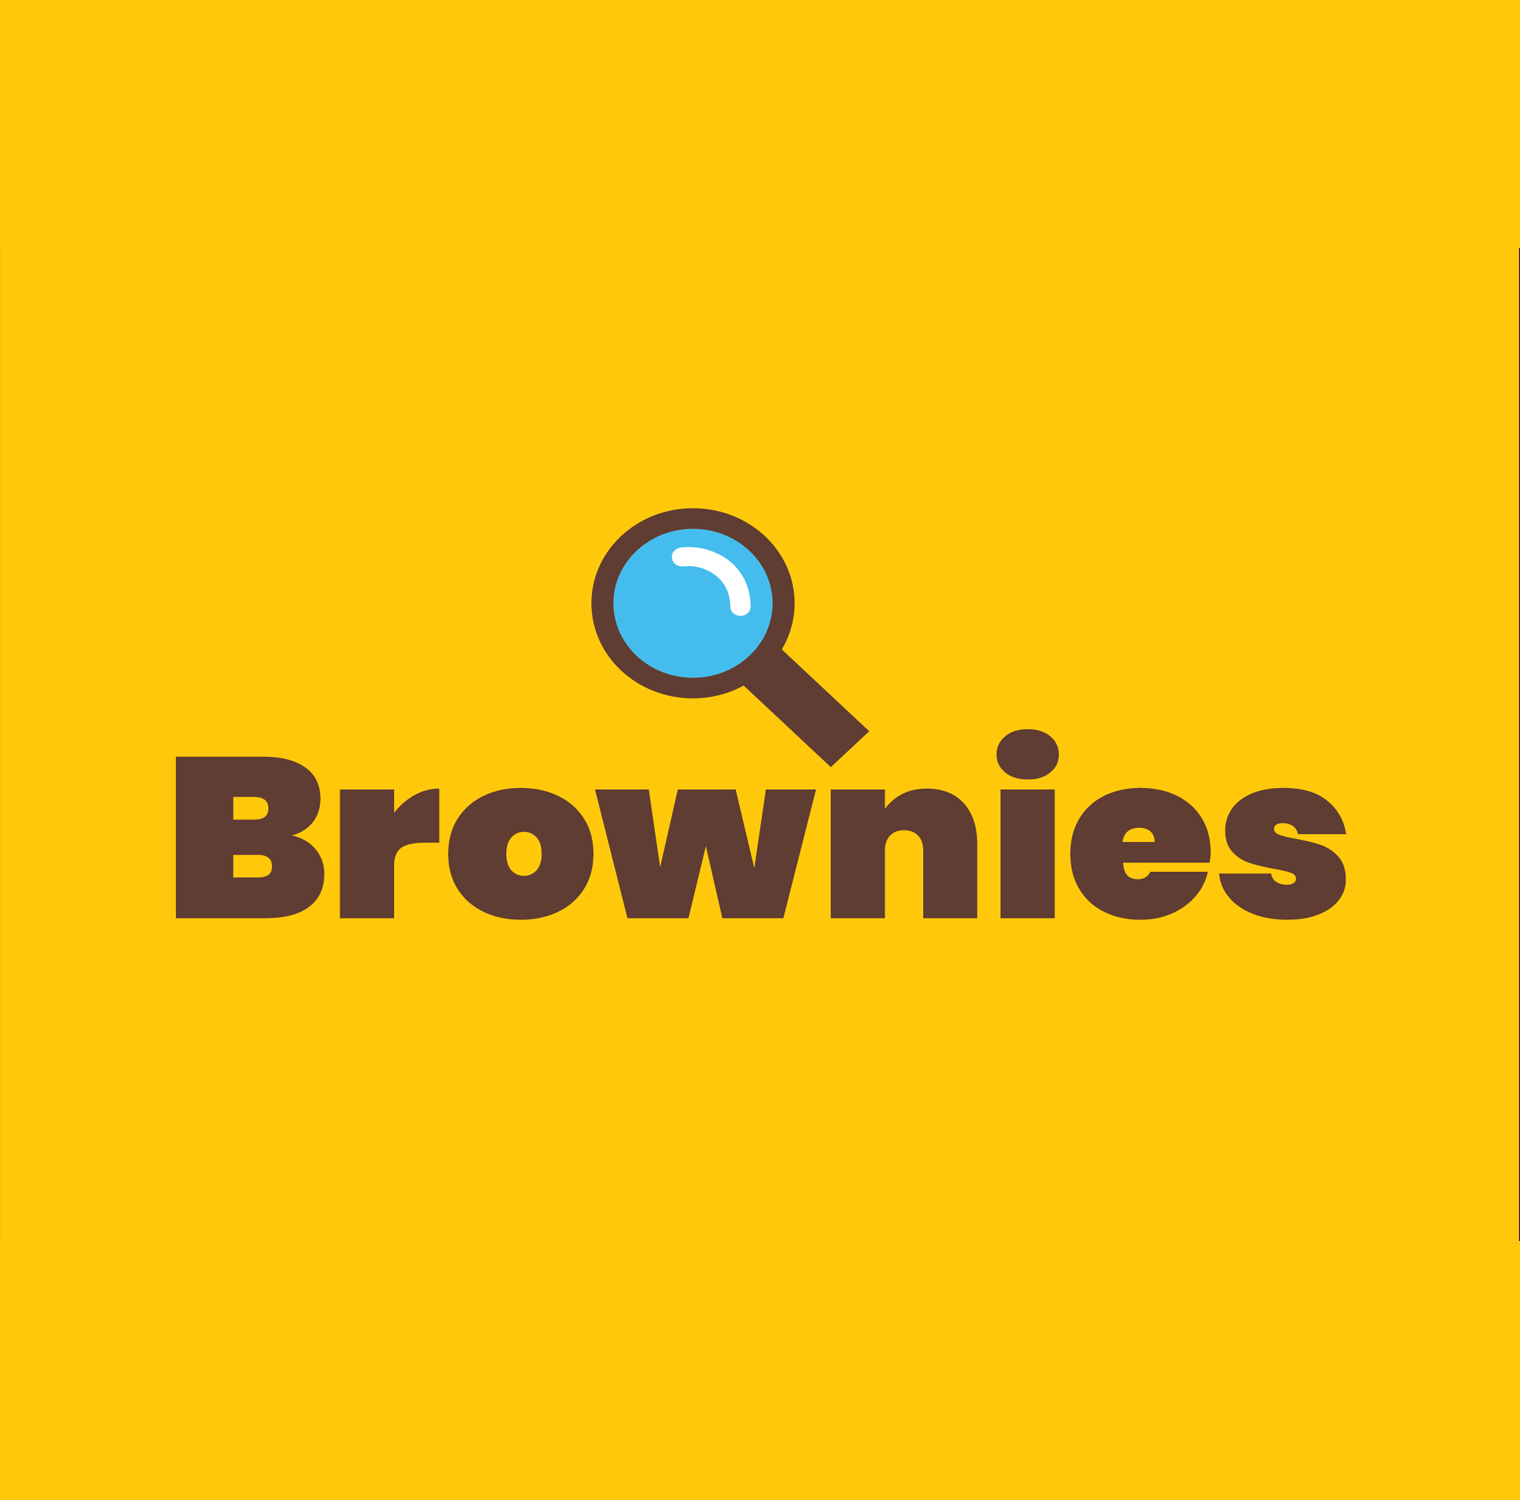 Brownies written in brown font on yellow background